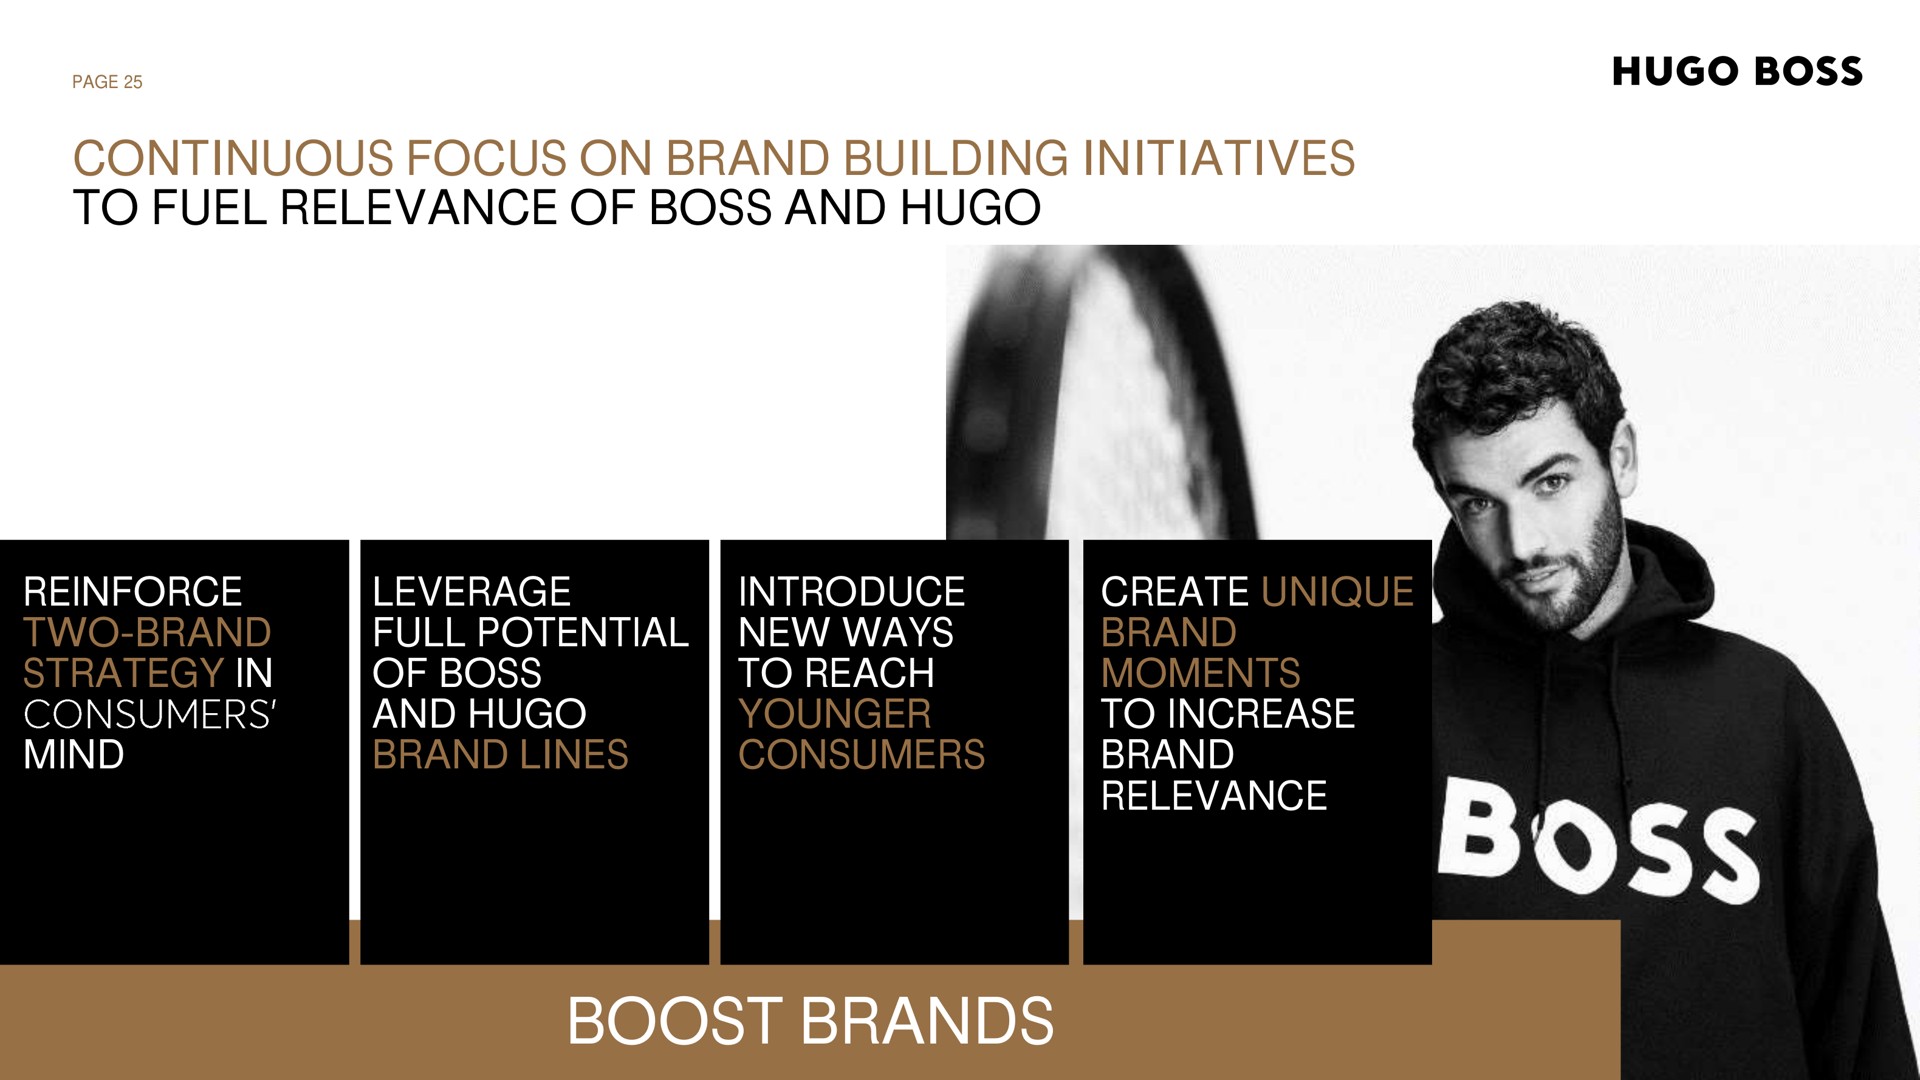 continuous focus on brand building initiatives to fuel relevance of boss and boost brands page reinforce introduce leverage full potential new ways create reach in consumers mind increase | Hugo Boss